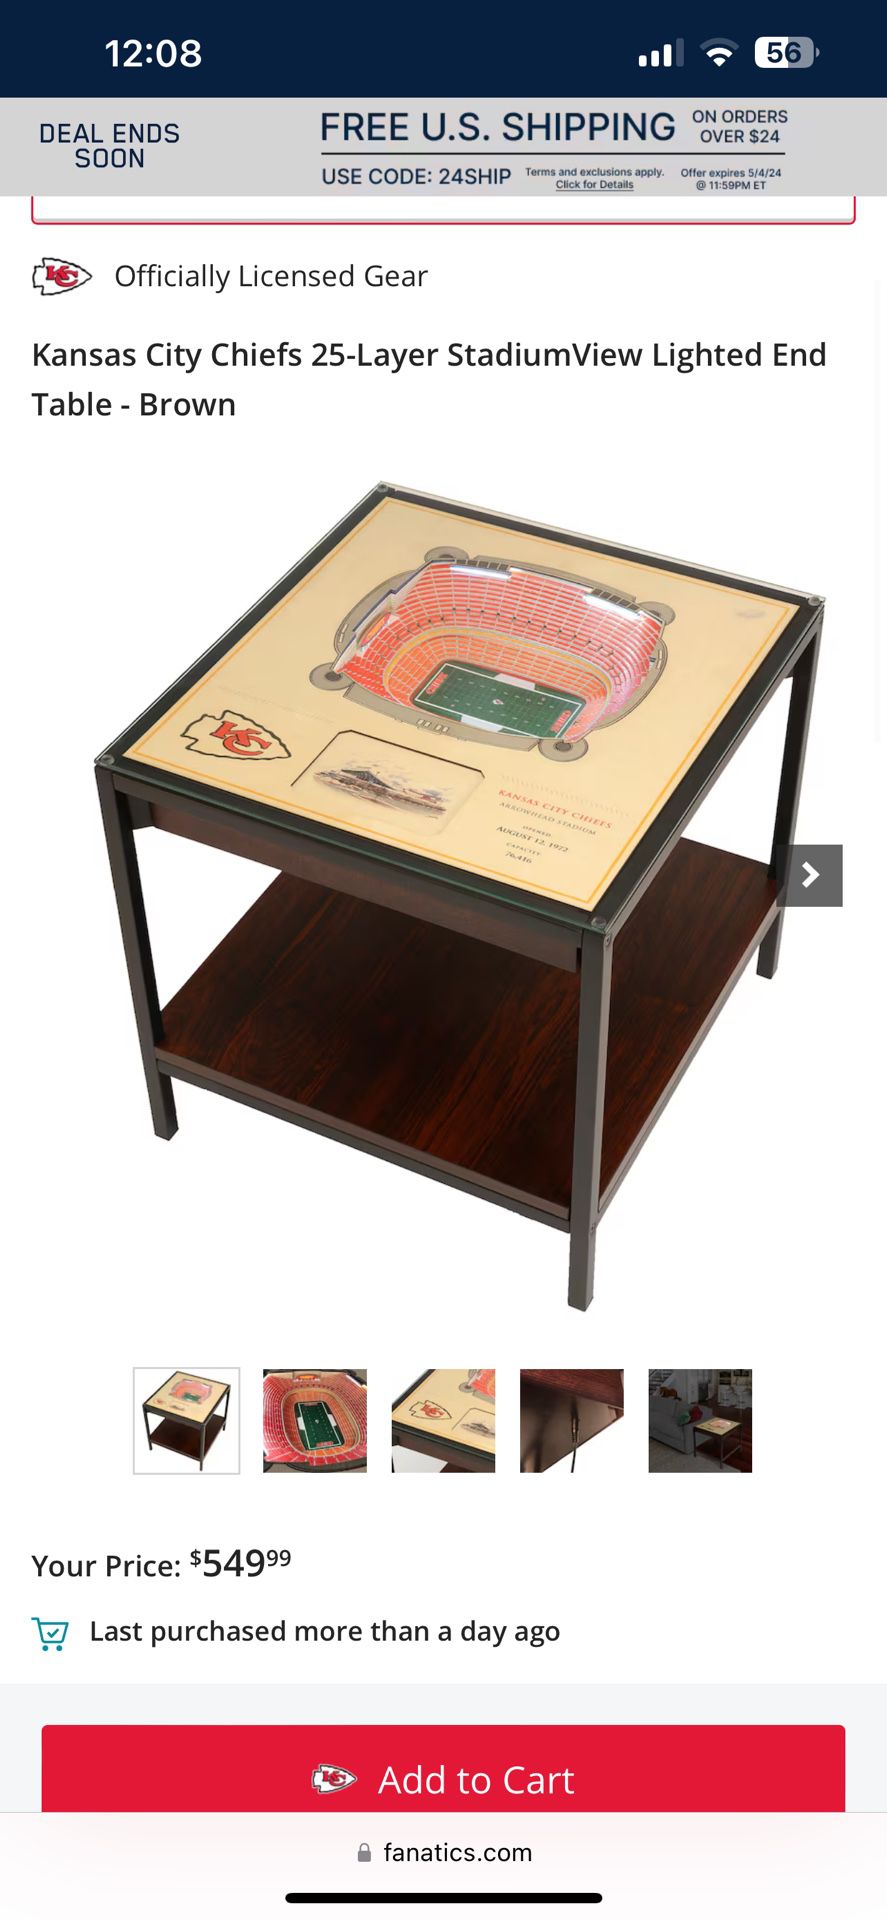 Kansas City Chiefs 25-Layer StadiumView Lighted End Table - Brown